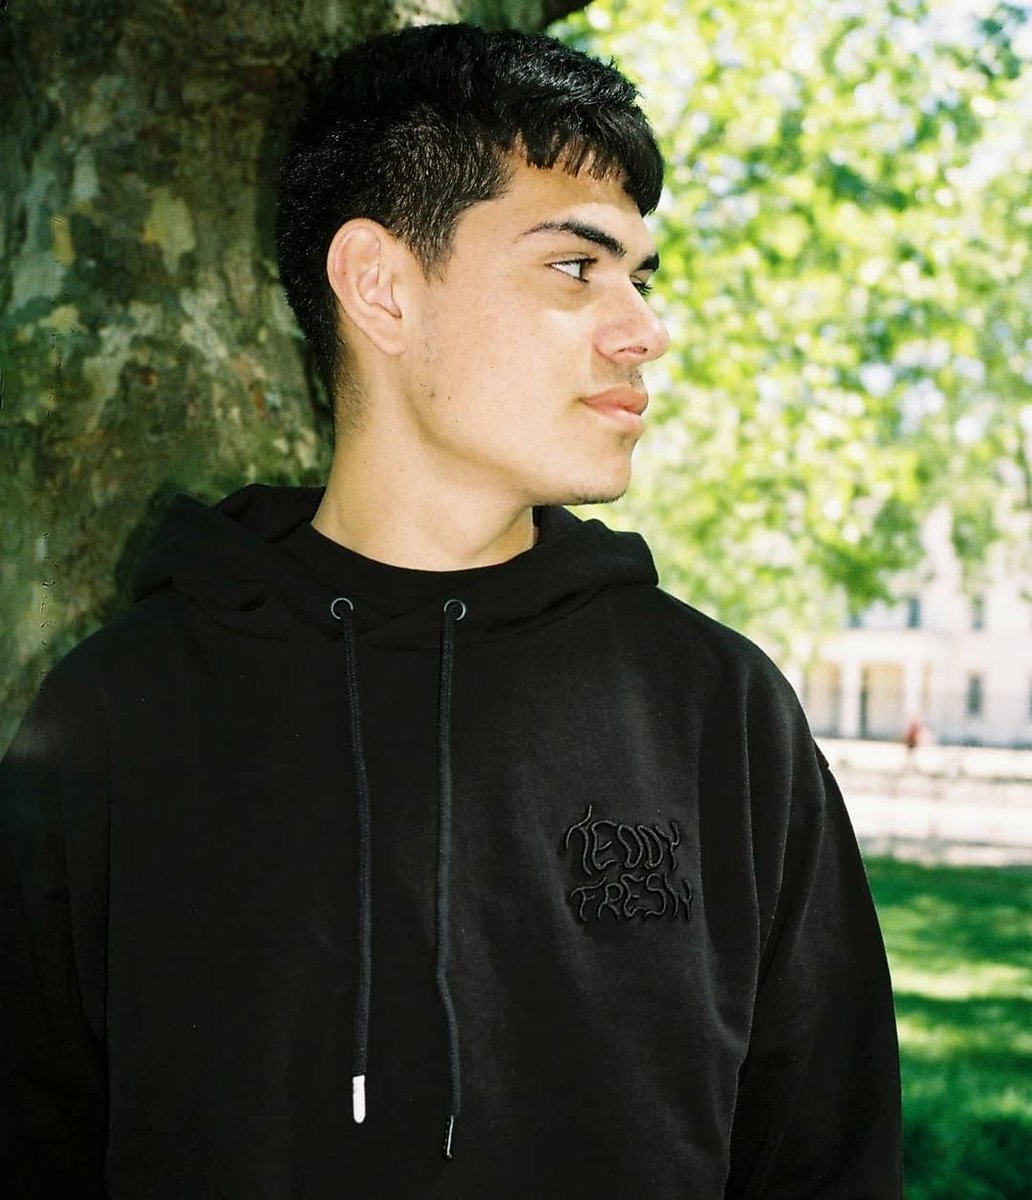 Teddy Fresh on Twitter: "Black on black embroidery hoodie coming out this Friday 💣 10:00 AM PST @ben_awin Model: @mitchytucker7 https://t.co/GW8l7E8aRZ" / Twitter